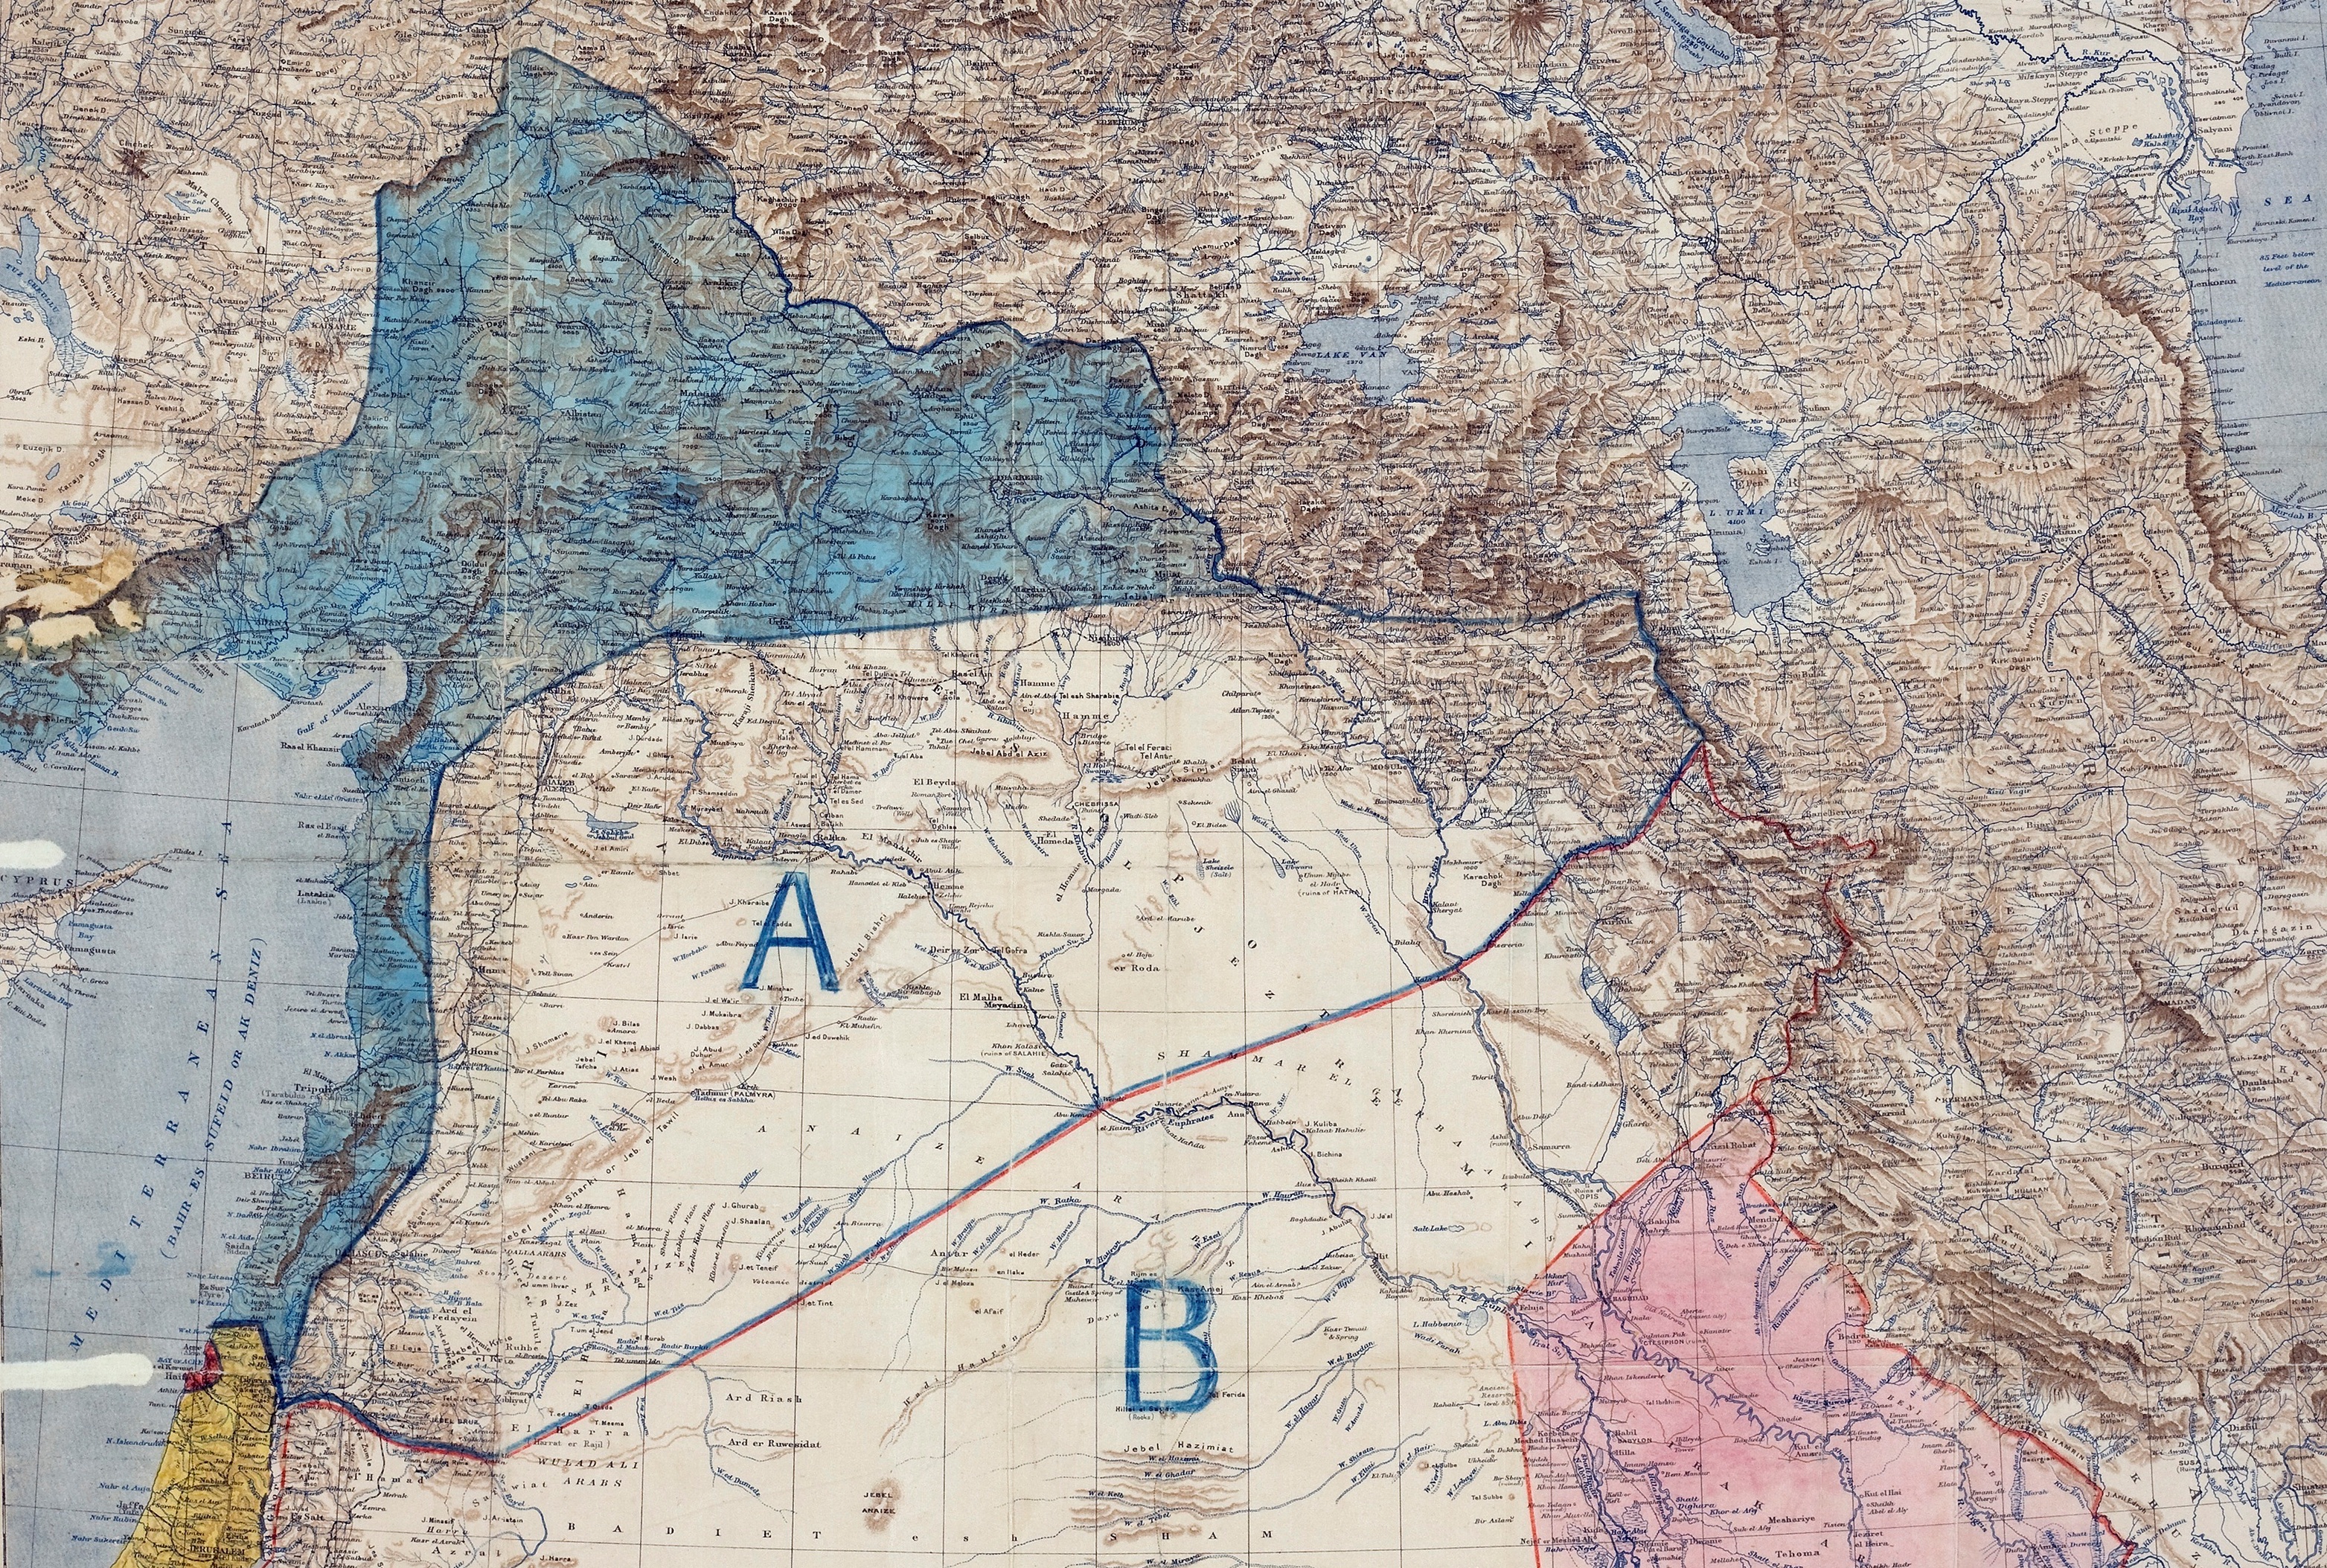 Map of Sykes-Picot Agreement showing Eastern Turkey in Asia, Syria and Western Persia, and areas of control and influence agreed between the British and the French. Royal Geographical Society, 1910-15. Signed by Mark Sykes and François Georges-Picot, 8 May 1916 (image: The National Archives, UK – public domain)